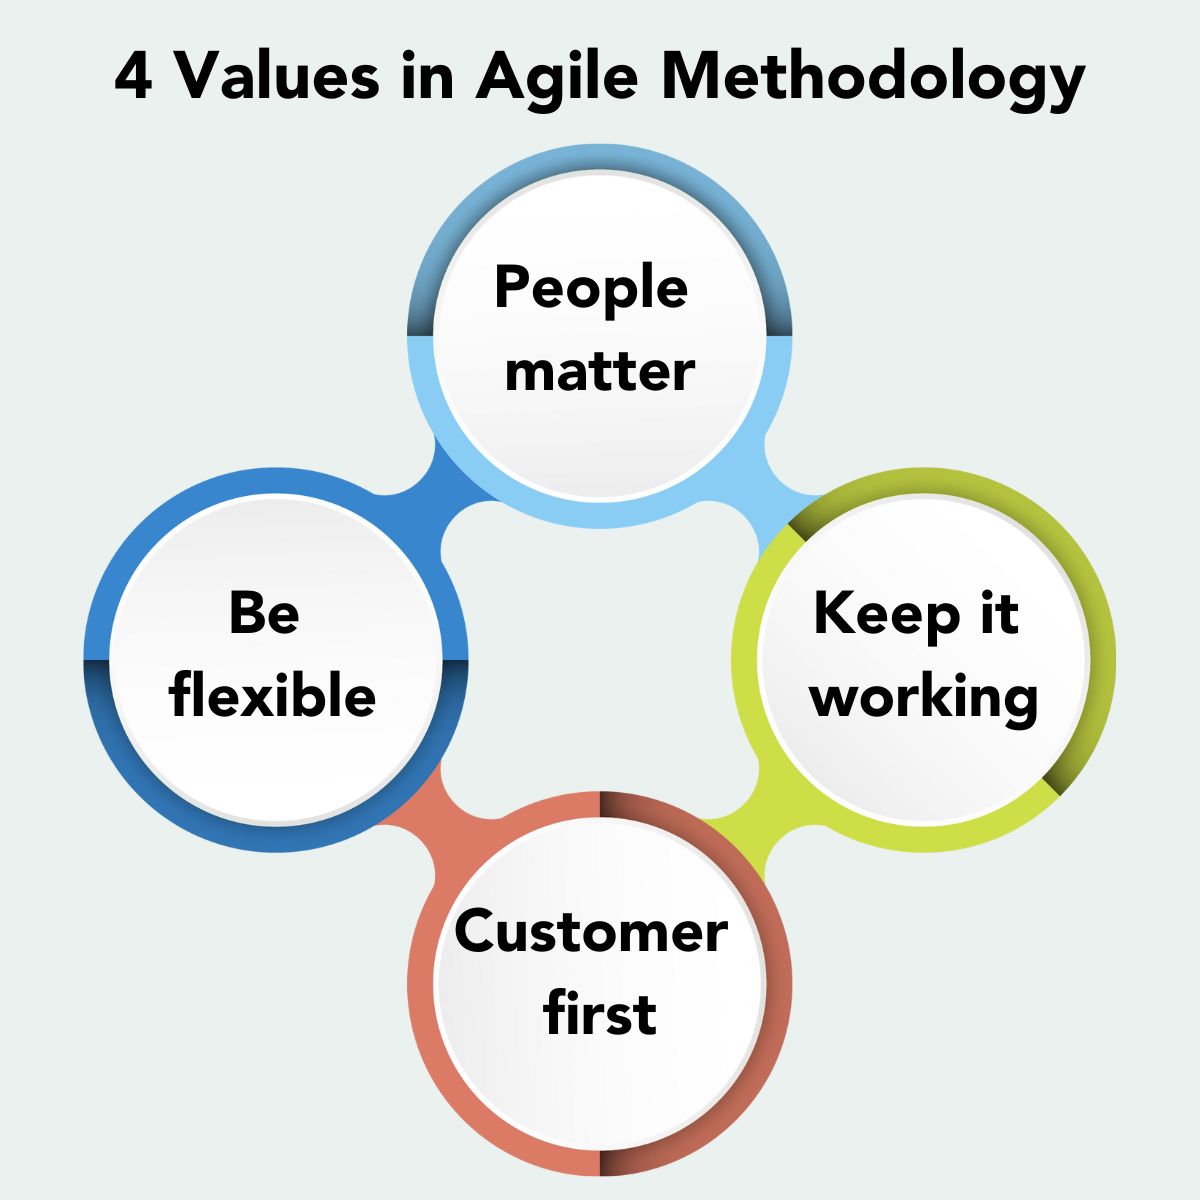 The Agile methodology is a flexible approach to project management that emphasises repetitious development, collaboration, and customer feedback.  Unlike traditional Waterfall* methods, Agile promotes adaptive planning, allowing teams to respond to changes and deliver incremental improvements throughout the Agile development process.  The many Agile frameworks provide specific methodologies for implementing these principles, enabling teams to deliver high-quality products efficiently and effectively.